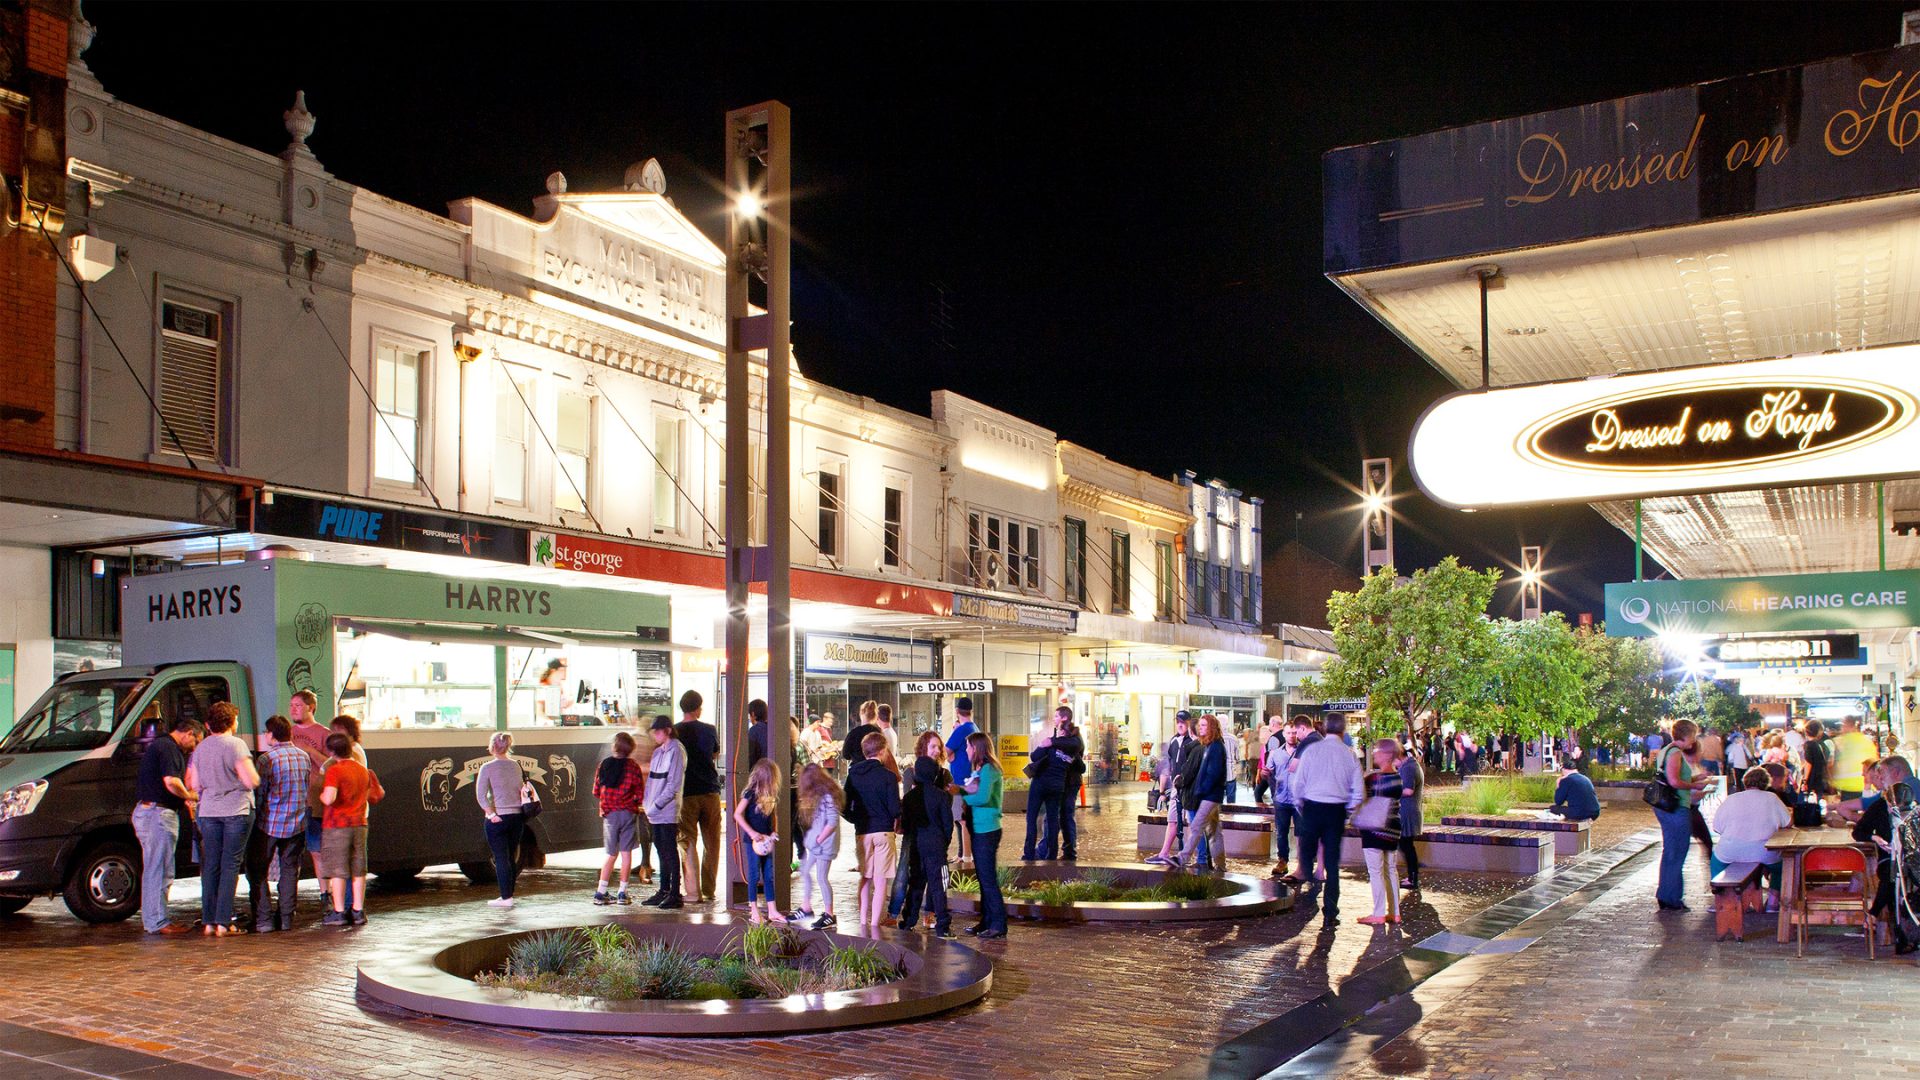 A vibrant street scene at night with people gathered near food trucks and outdoor seating areas on Maitland Levee. The street is illuminated with bright lights and various shops and cafes are visible. A sign for "Dressed on High" hangs prominently in the foreground.